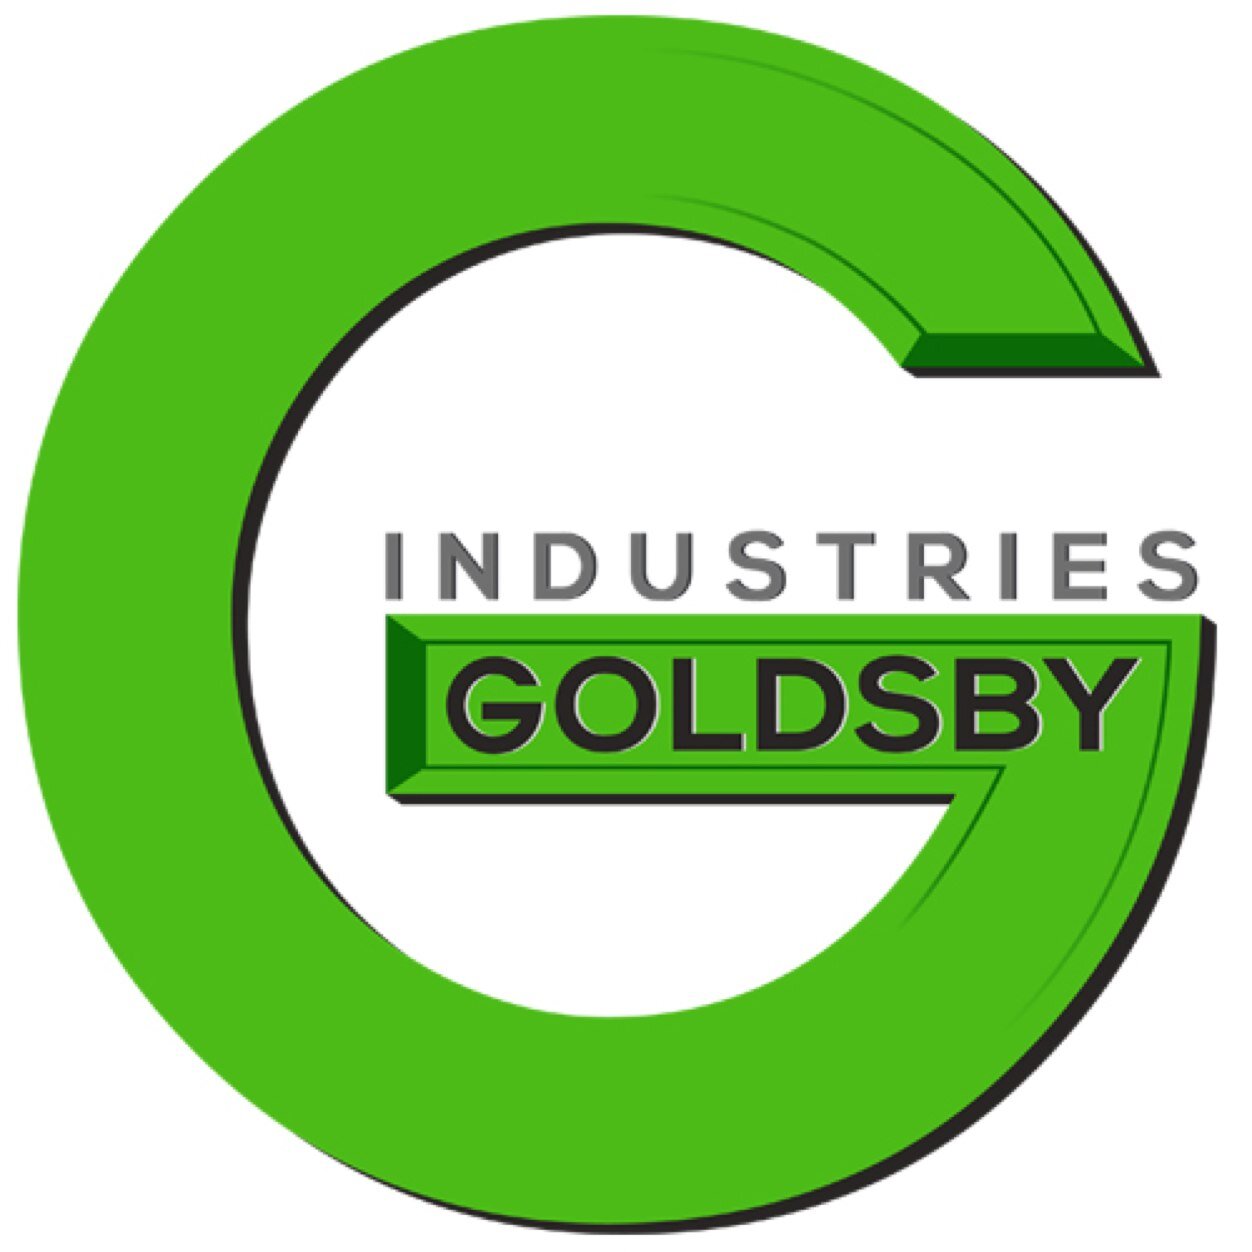 Founder and Ceo of Goldsby Industries. A solar power company with innovative space saving designs. #Solar #Green #GreenEnergy #Startup #CleanEnergy